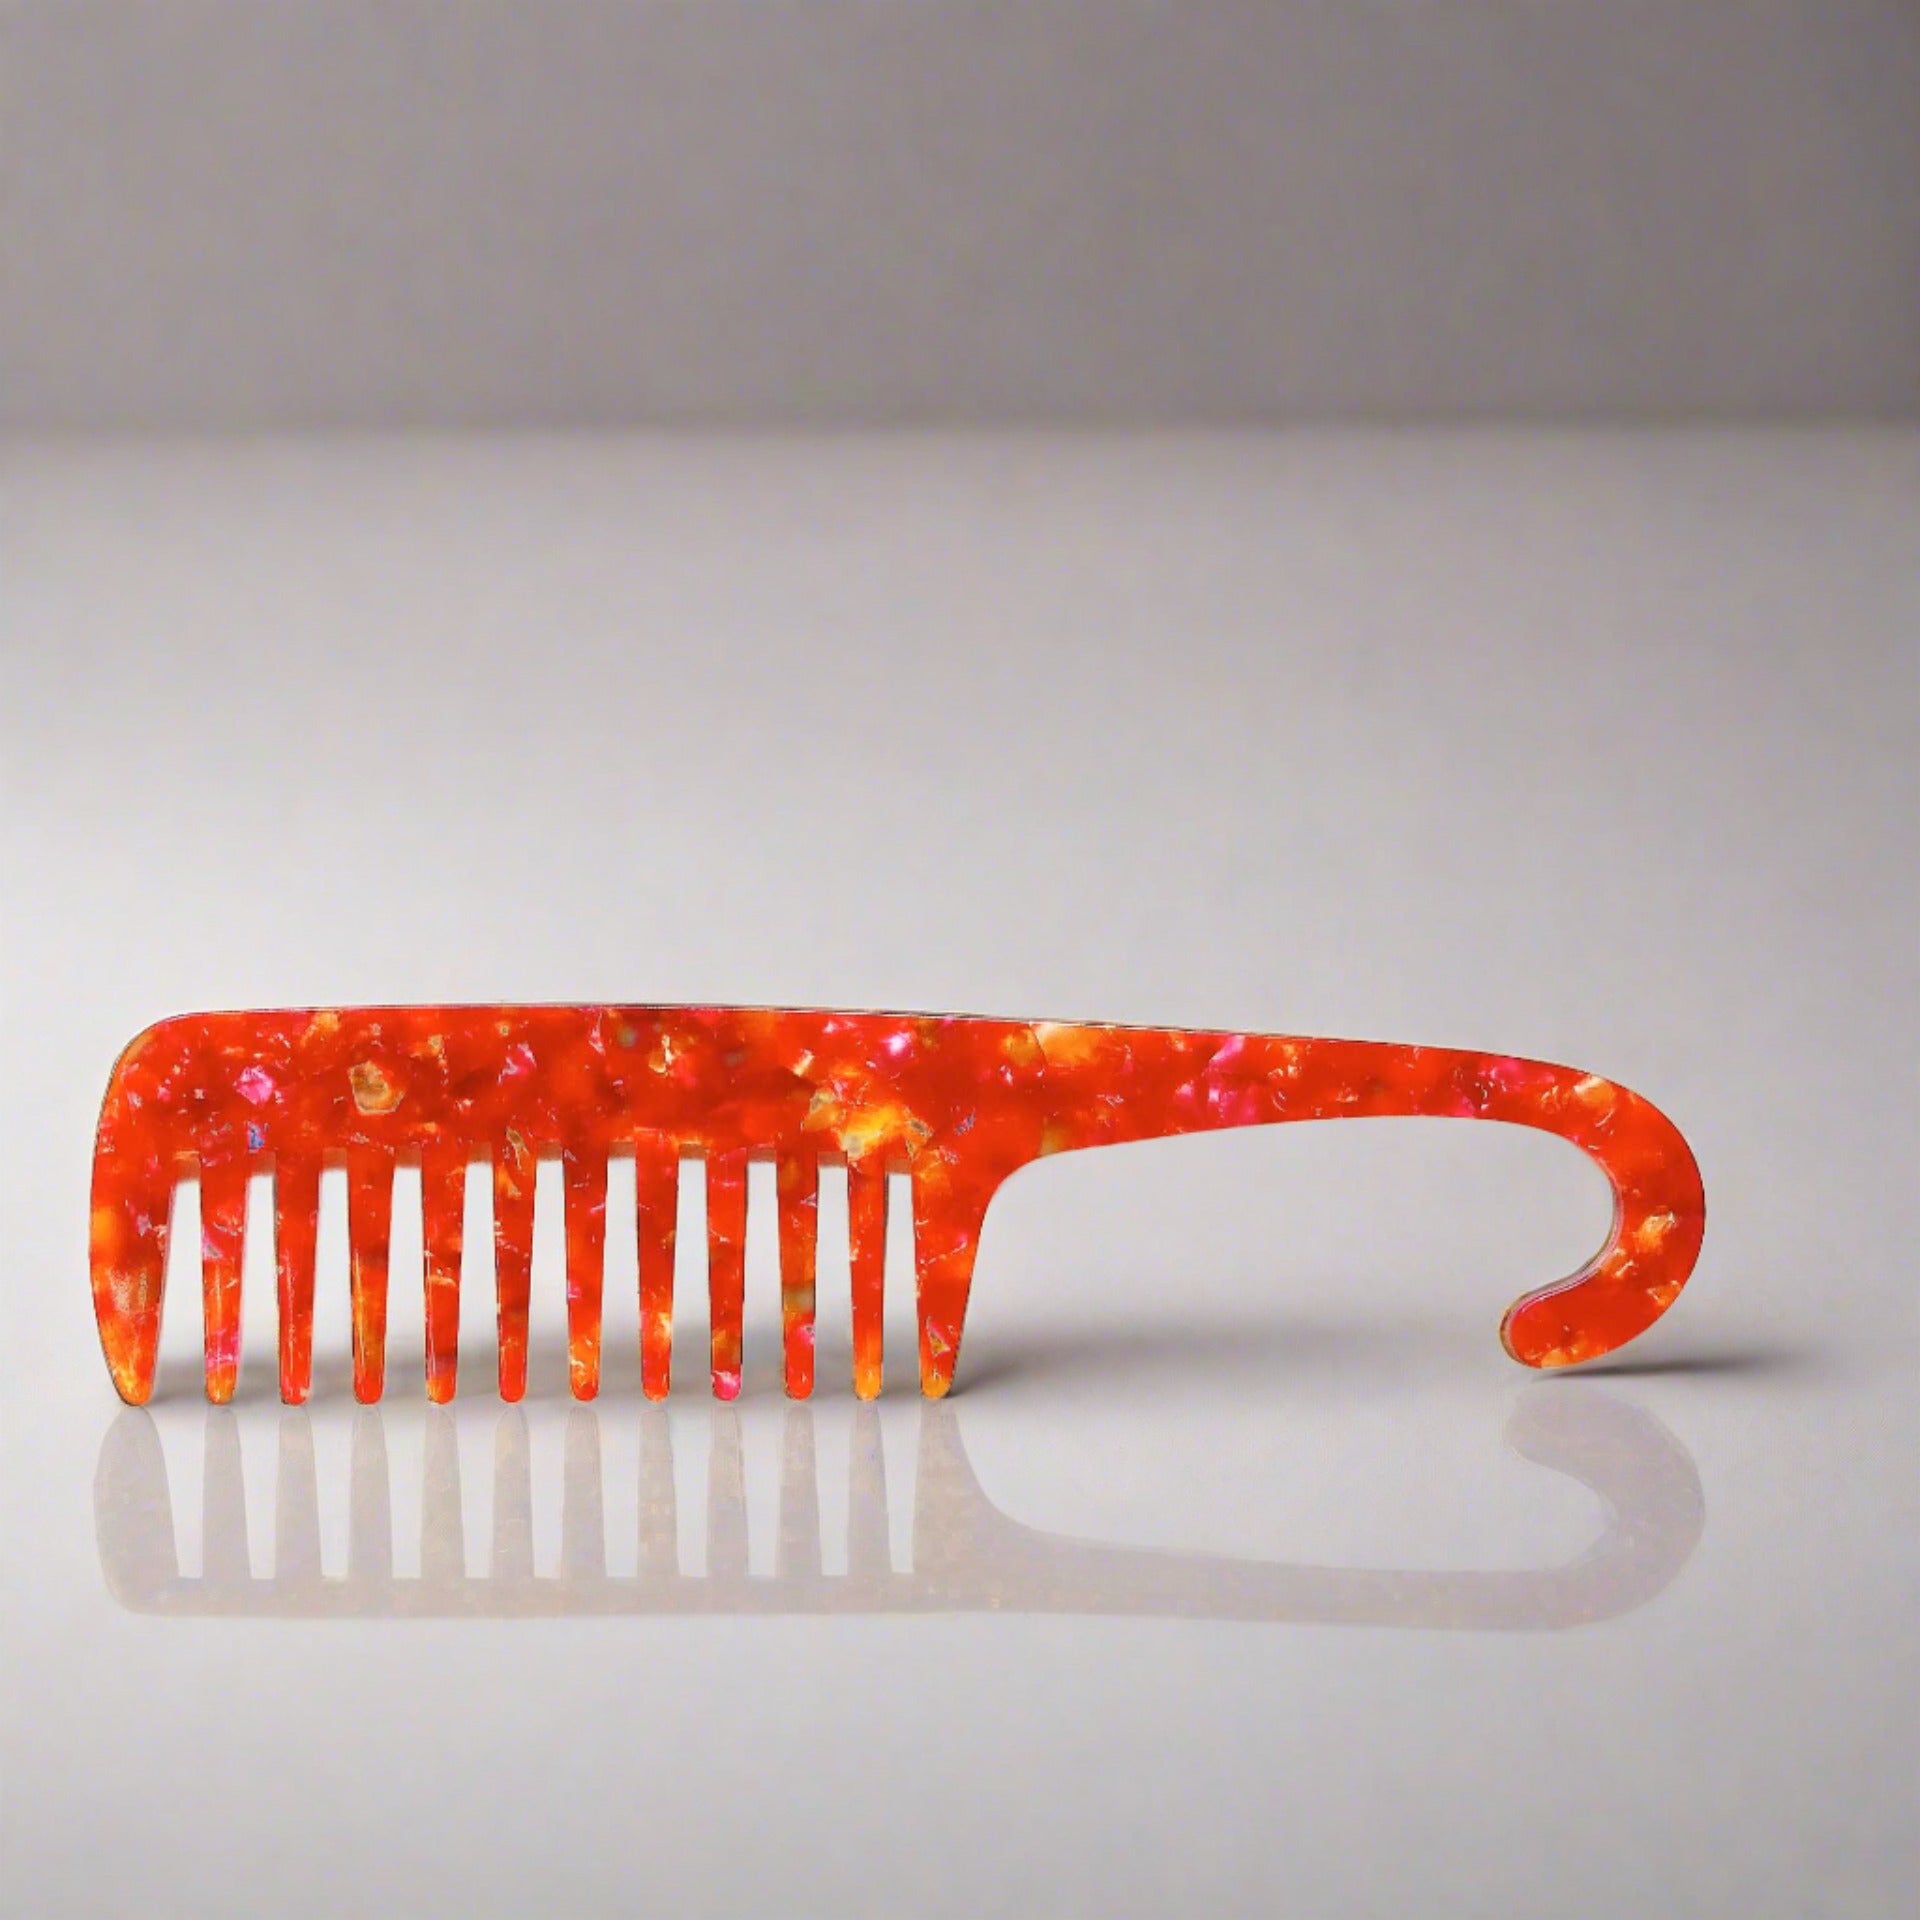 Wide tooth combs for use the bath and shower. These combs help to protect your hair and reduce damage to the strands when removing knots and tangles or working through hair conditioner